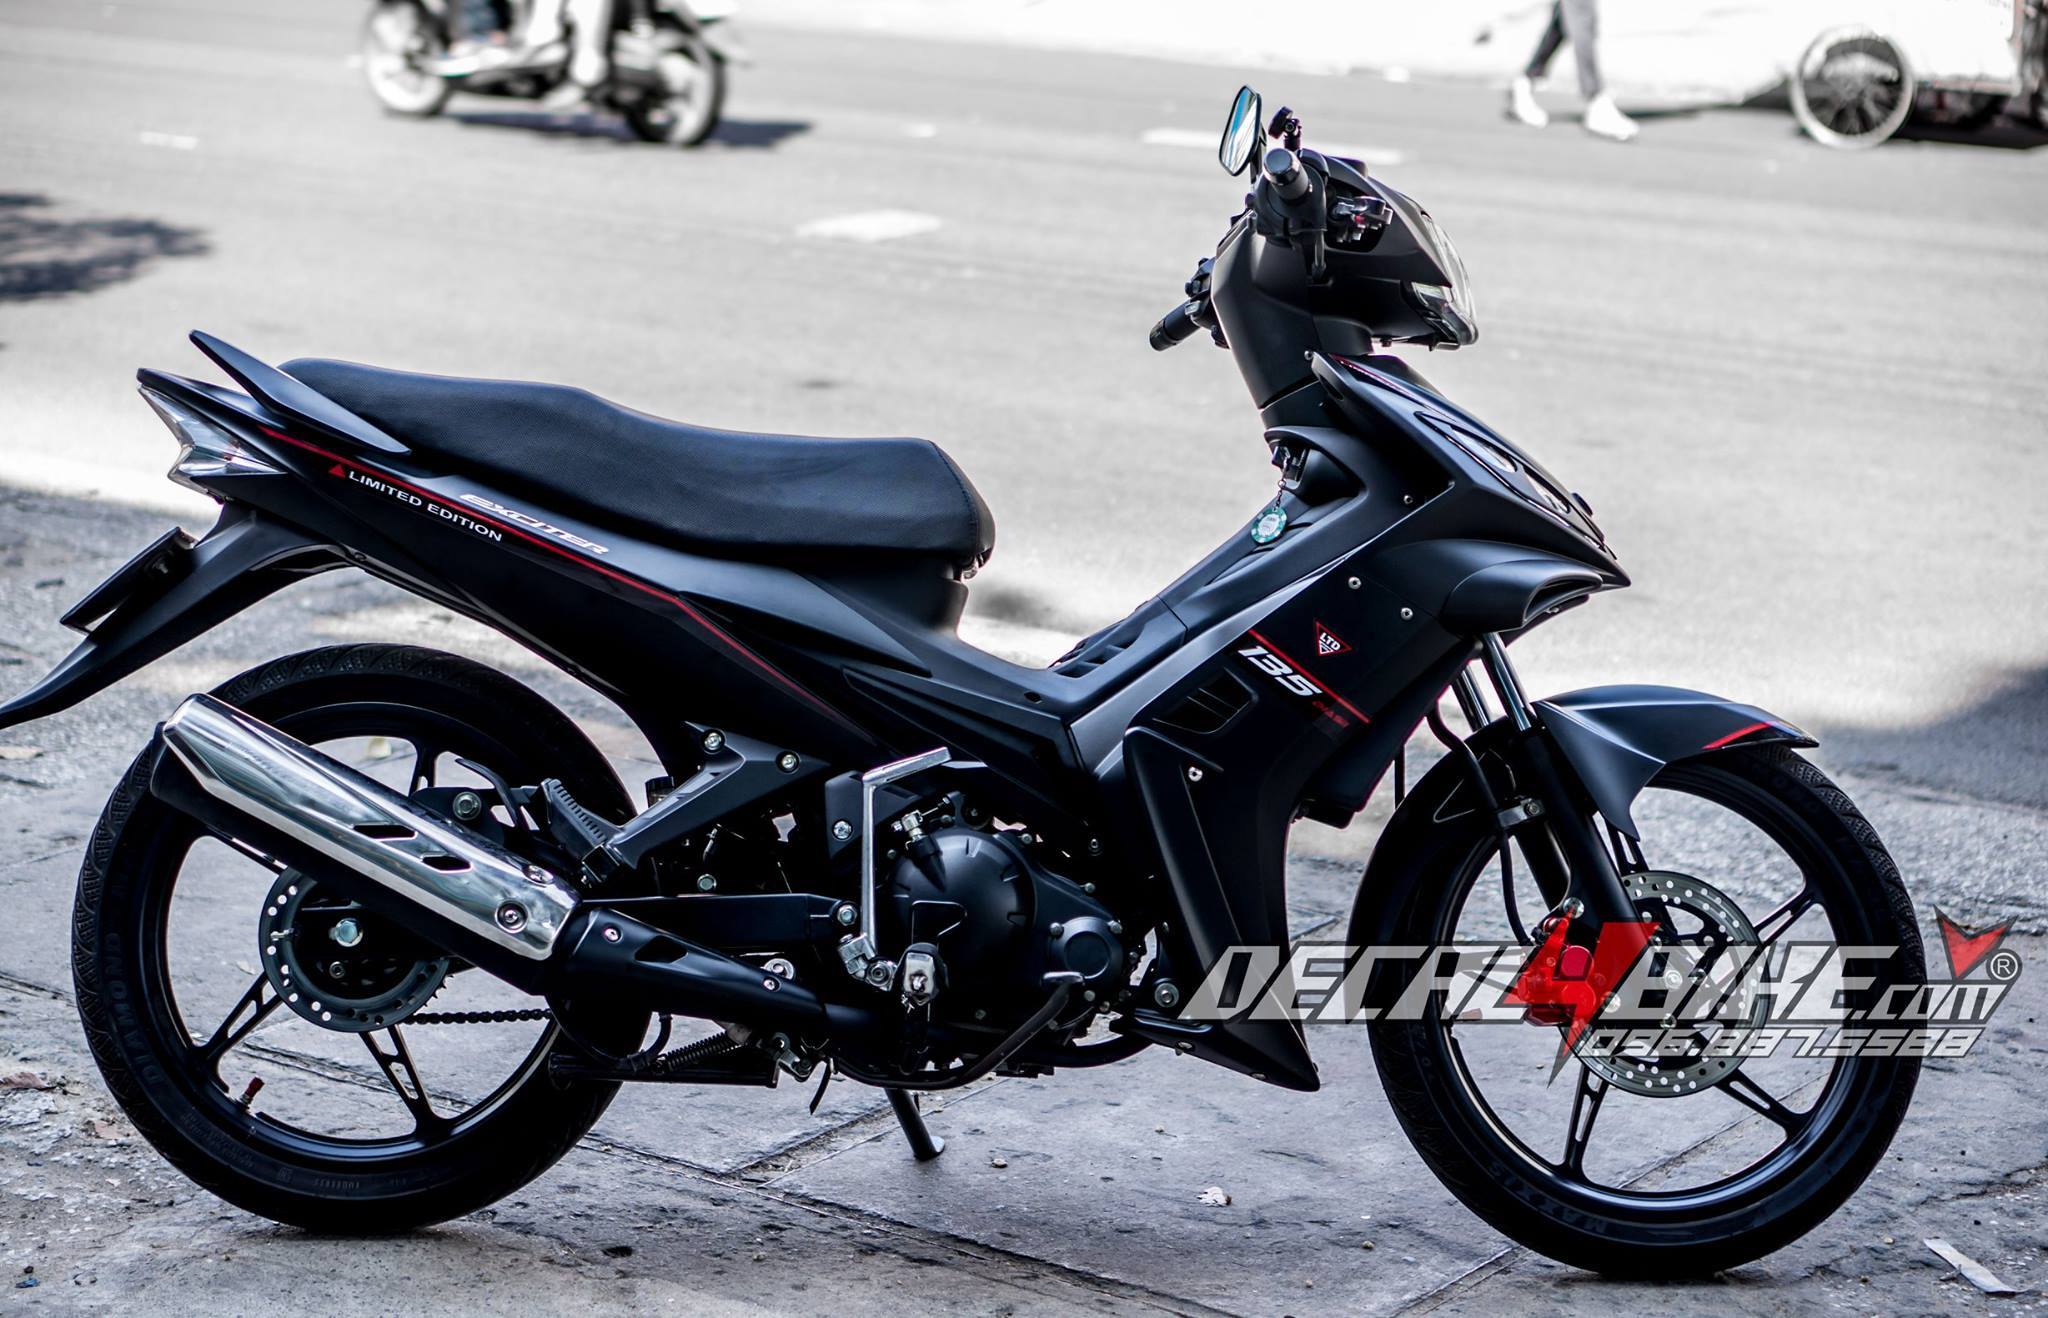 Exciter 2010 Limited Edition (Tem rời) | Decal4Bike Center